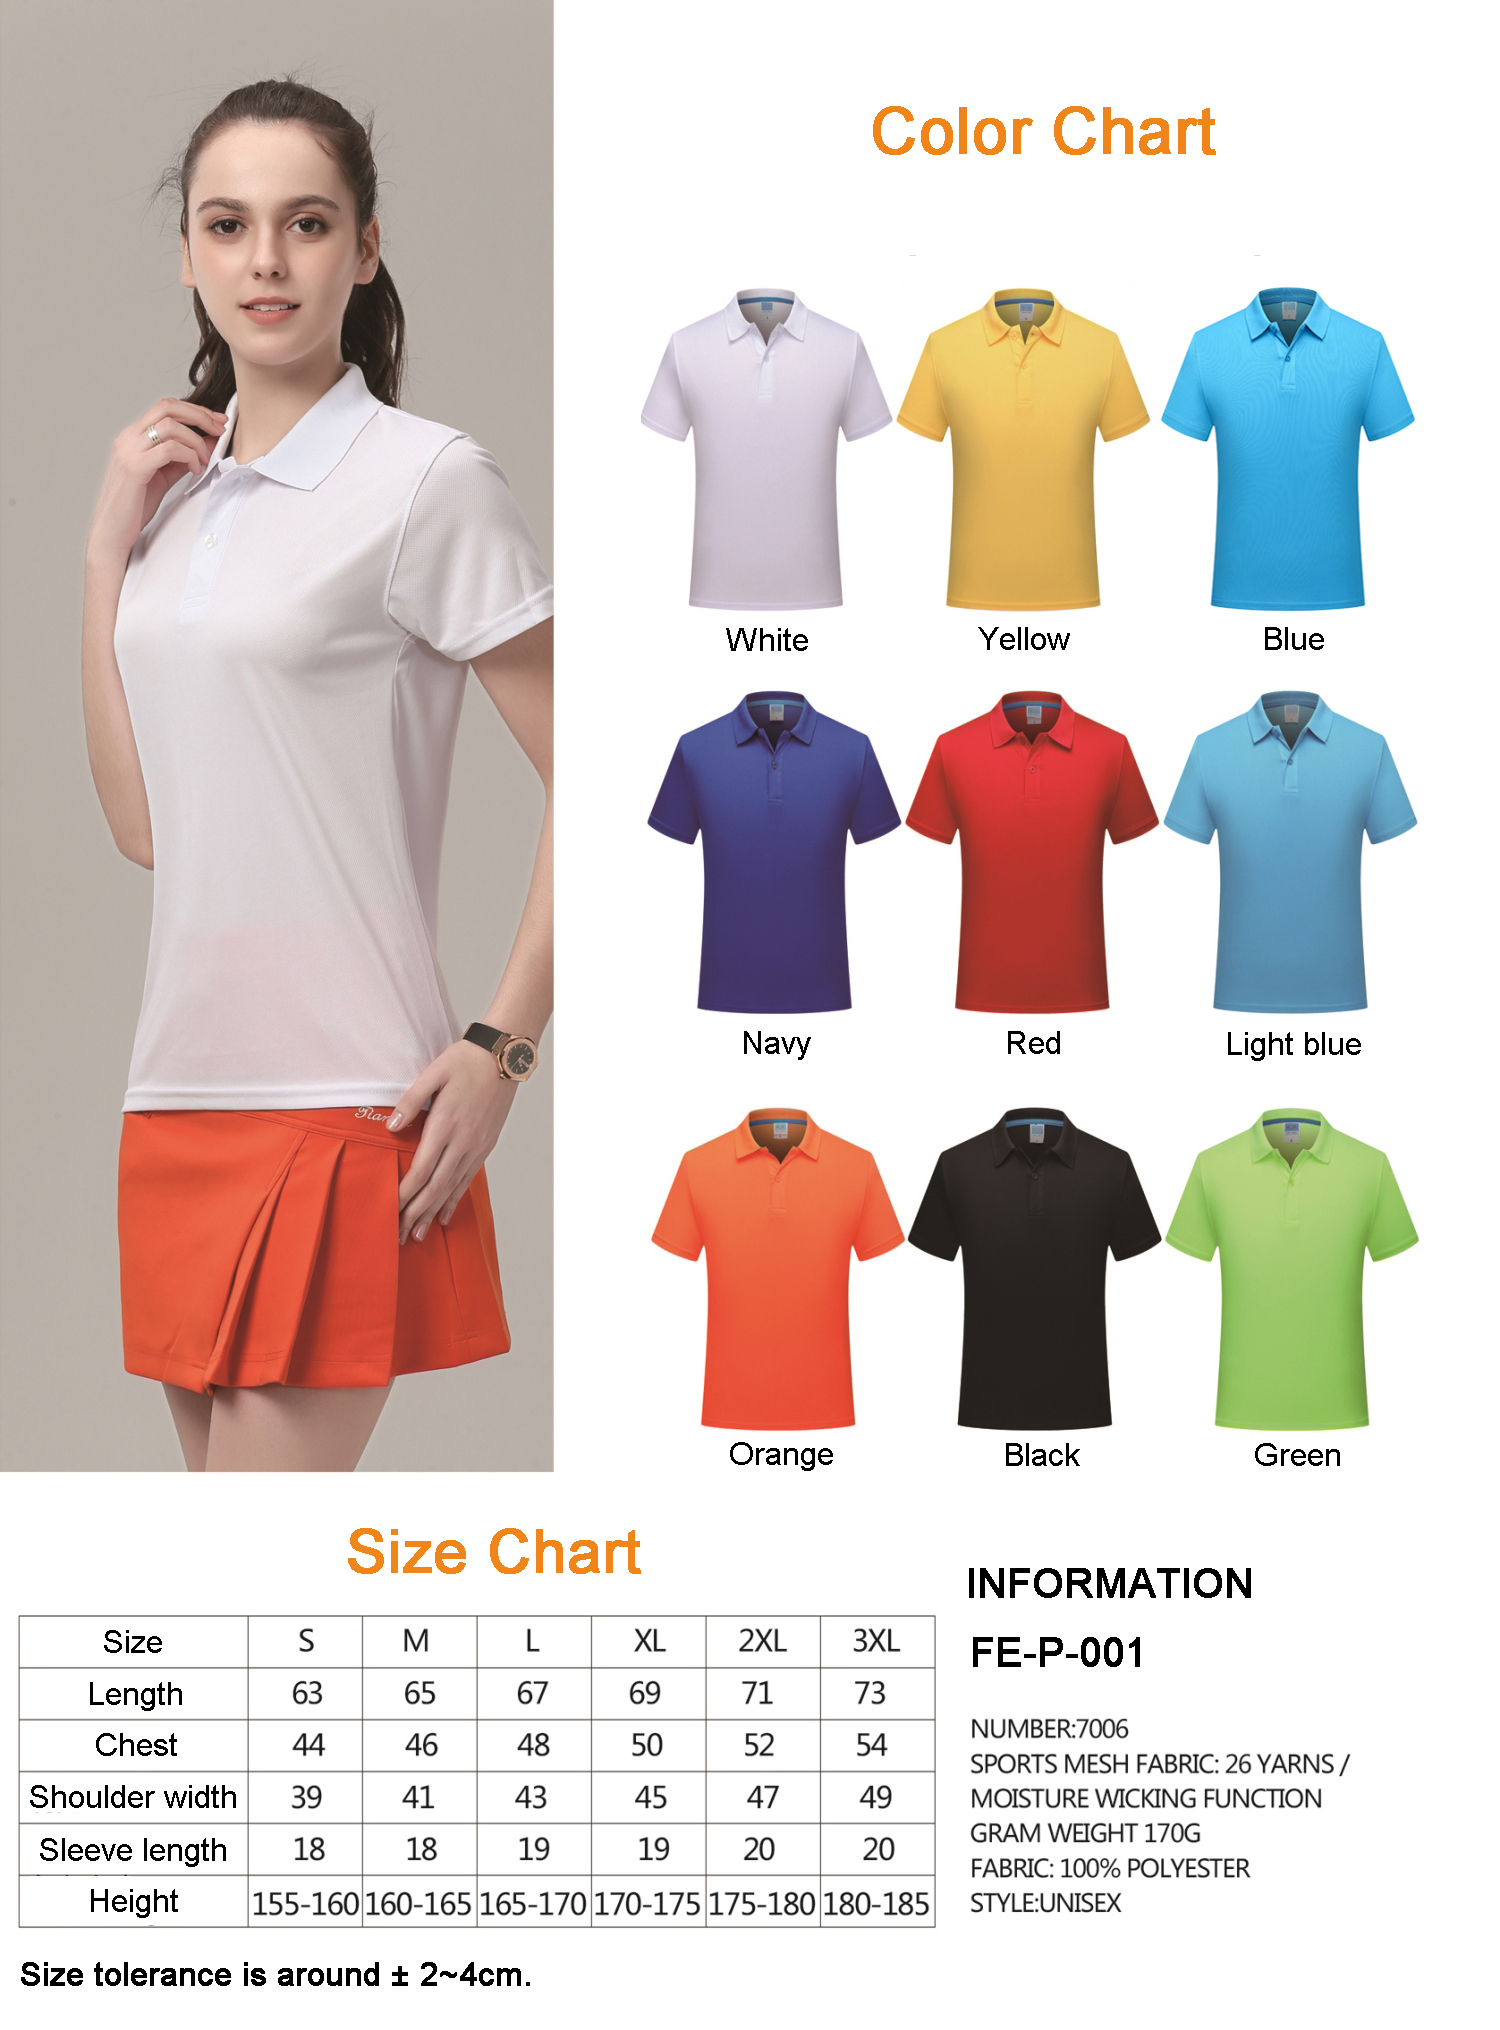 FE-P-001__7006_Size_Chart_and_Available_Colors.jpg